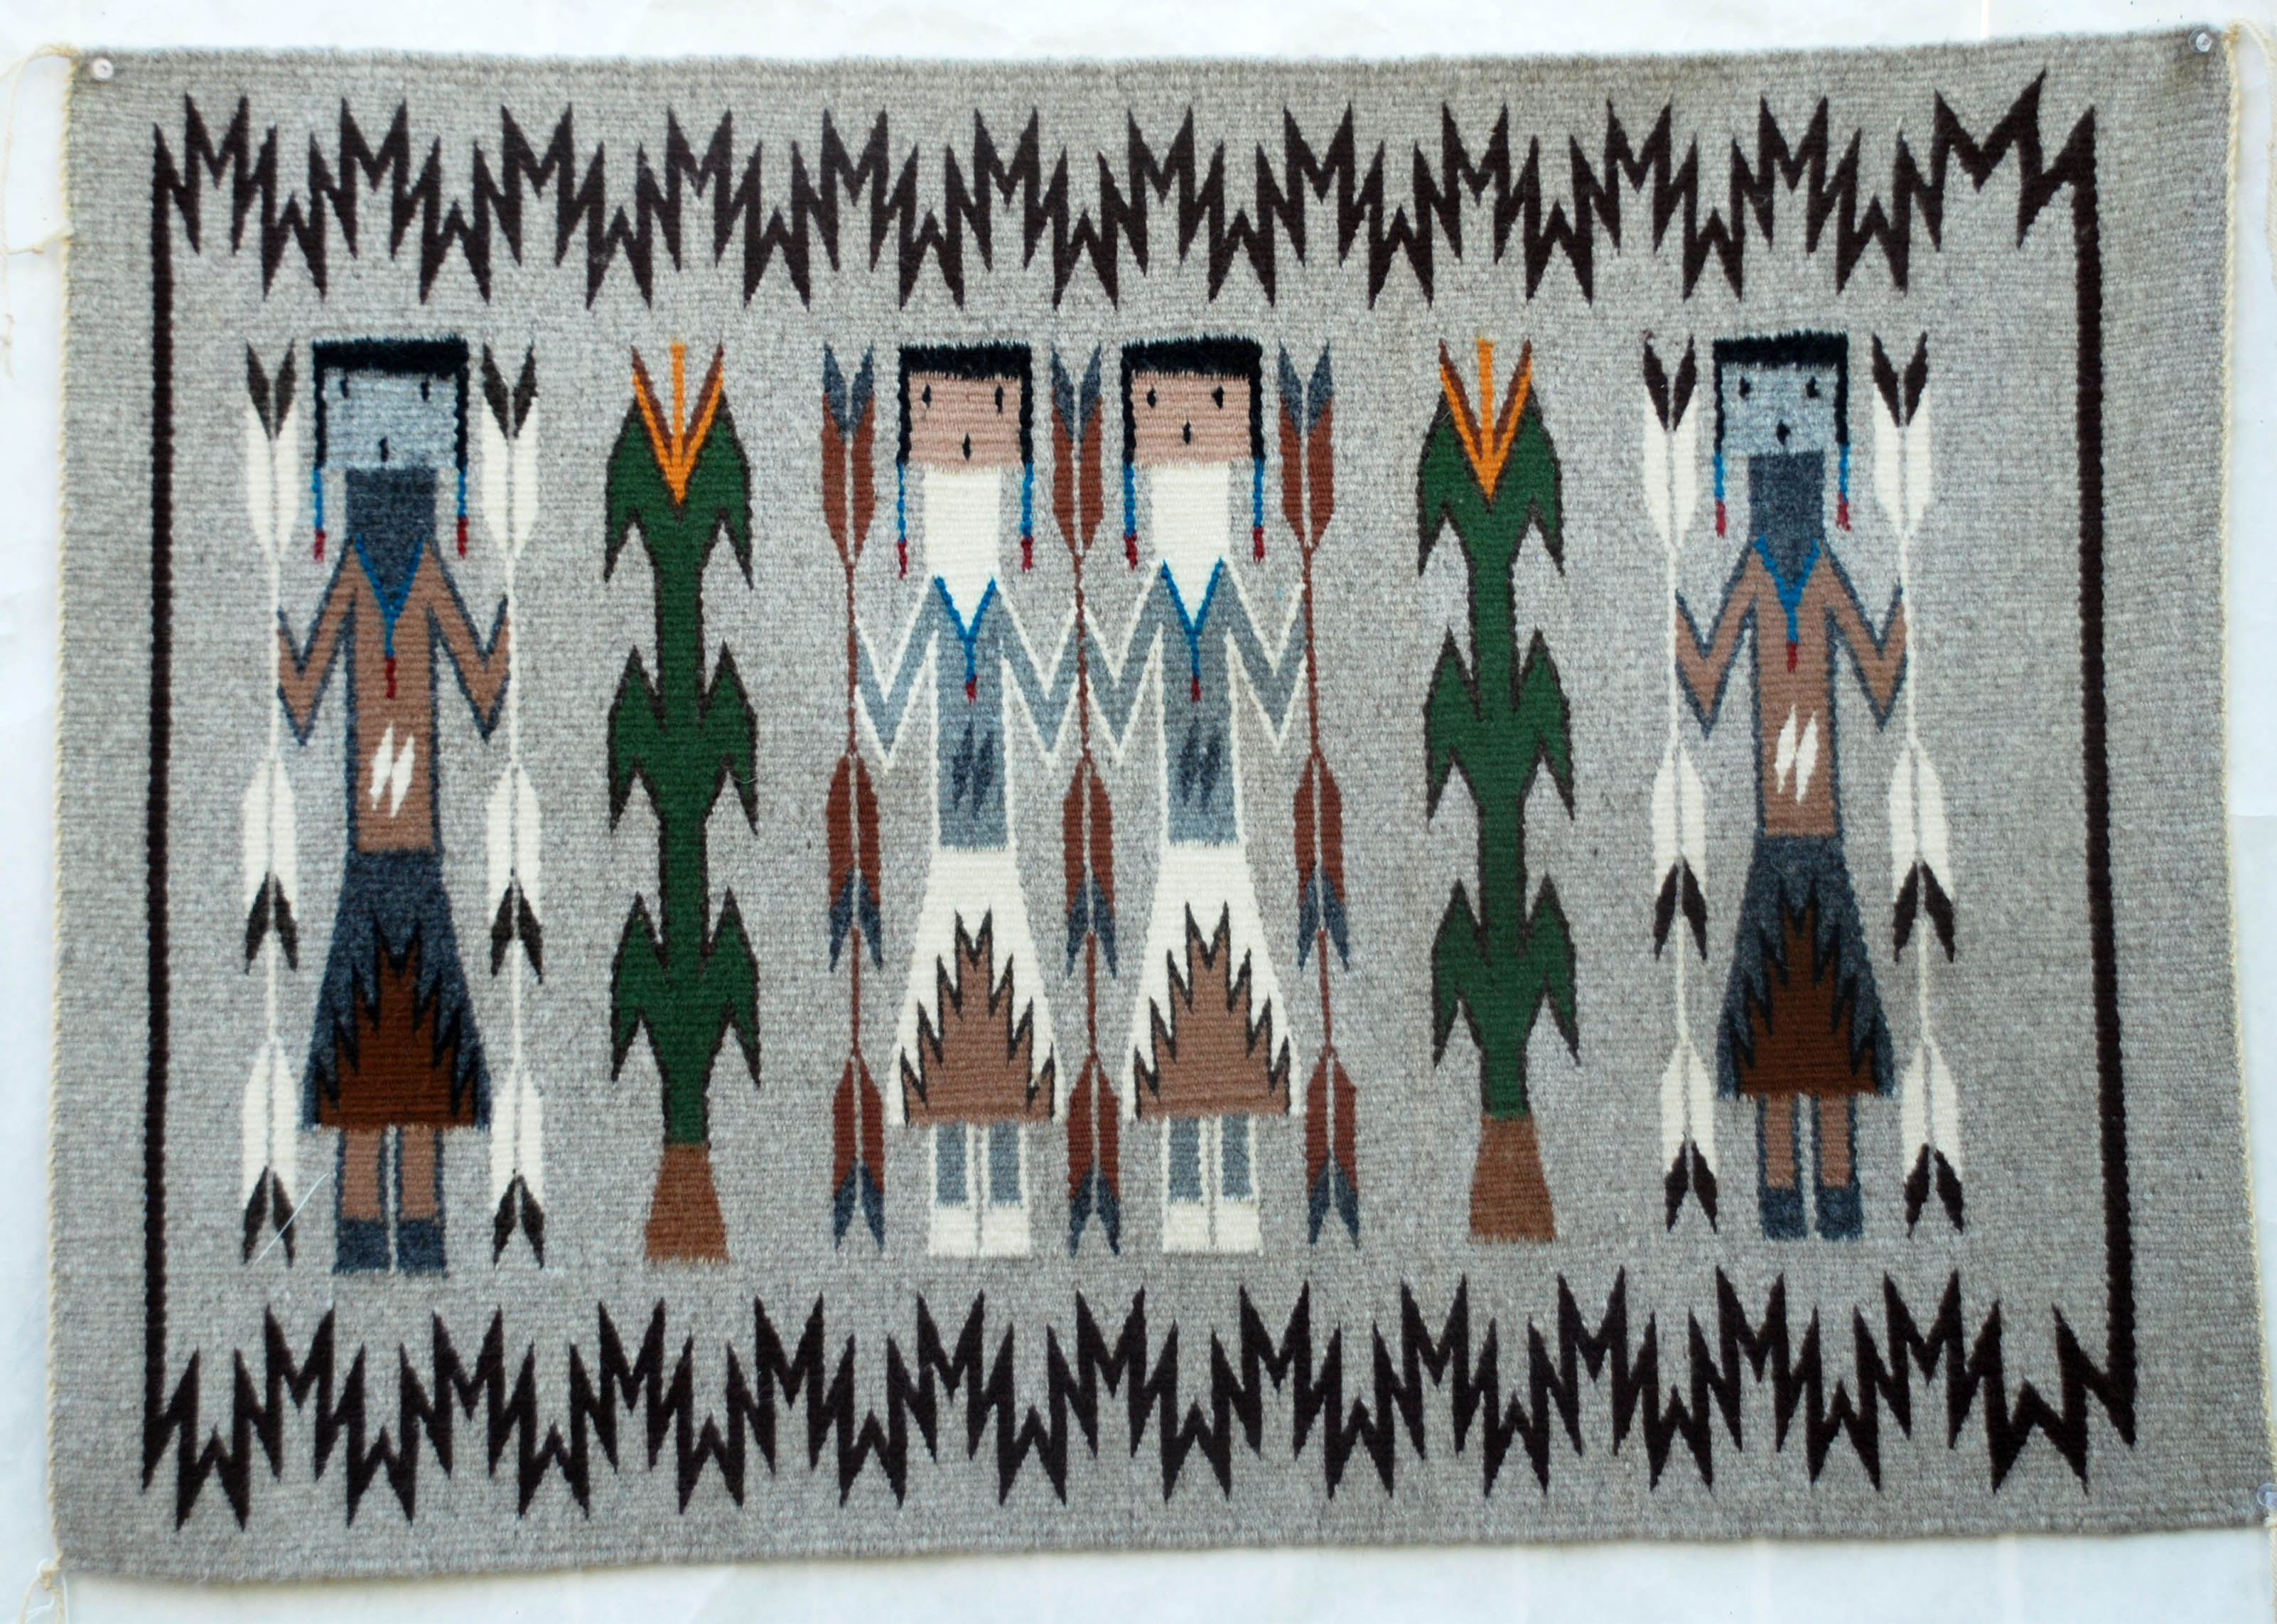 Louise White | Navajo Yei Rug with Yeiis and Sacred Corn | Penfield Gallery of Indian Arts | Albuquerque, New Mexico